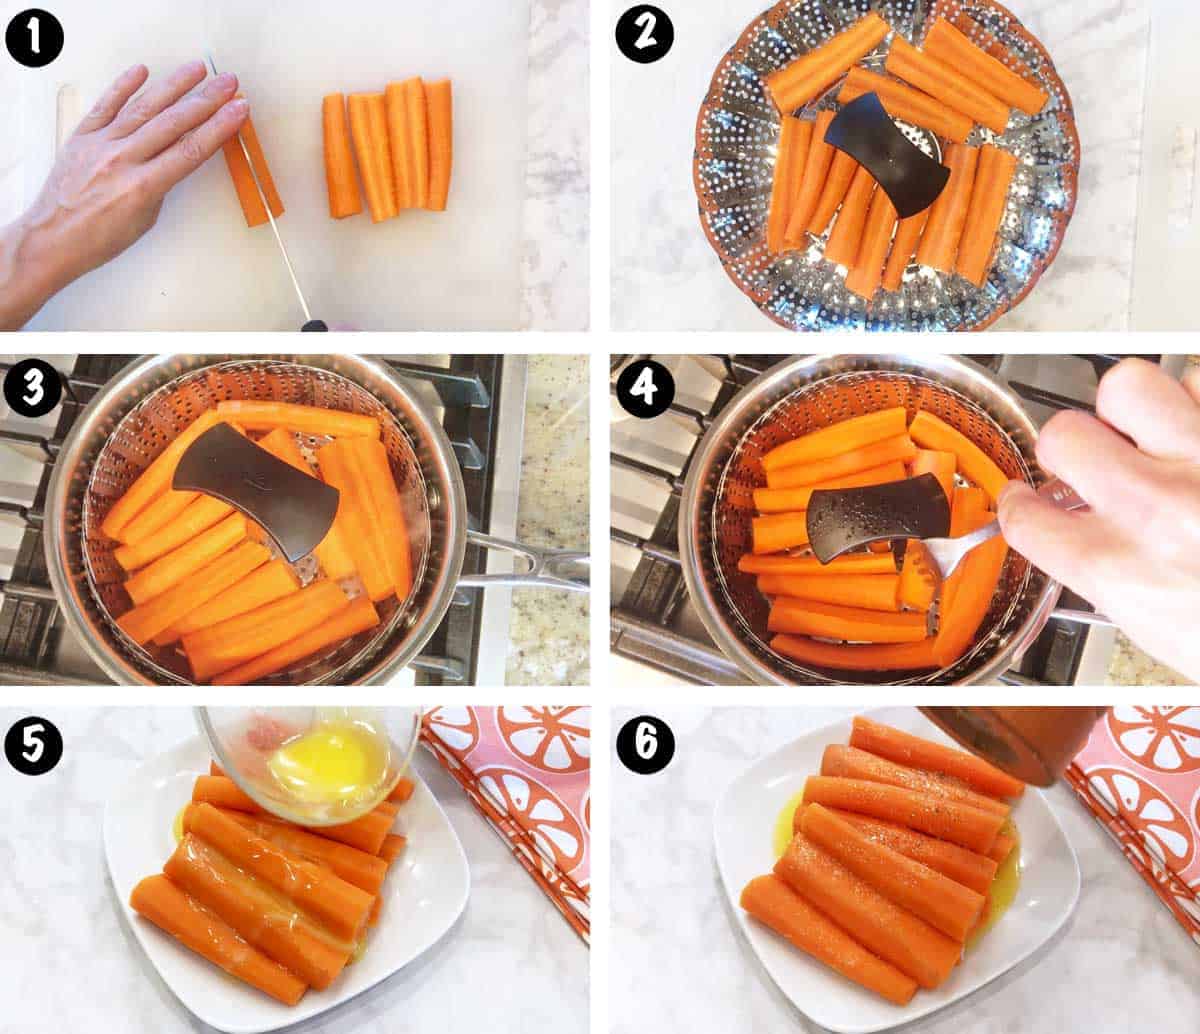 A photo collage showing the steps for steaming carrots. 